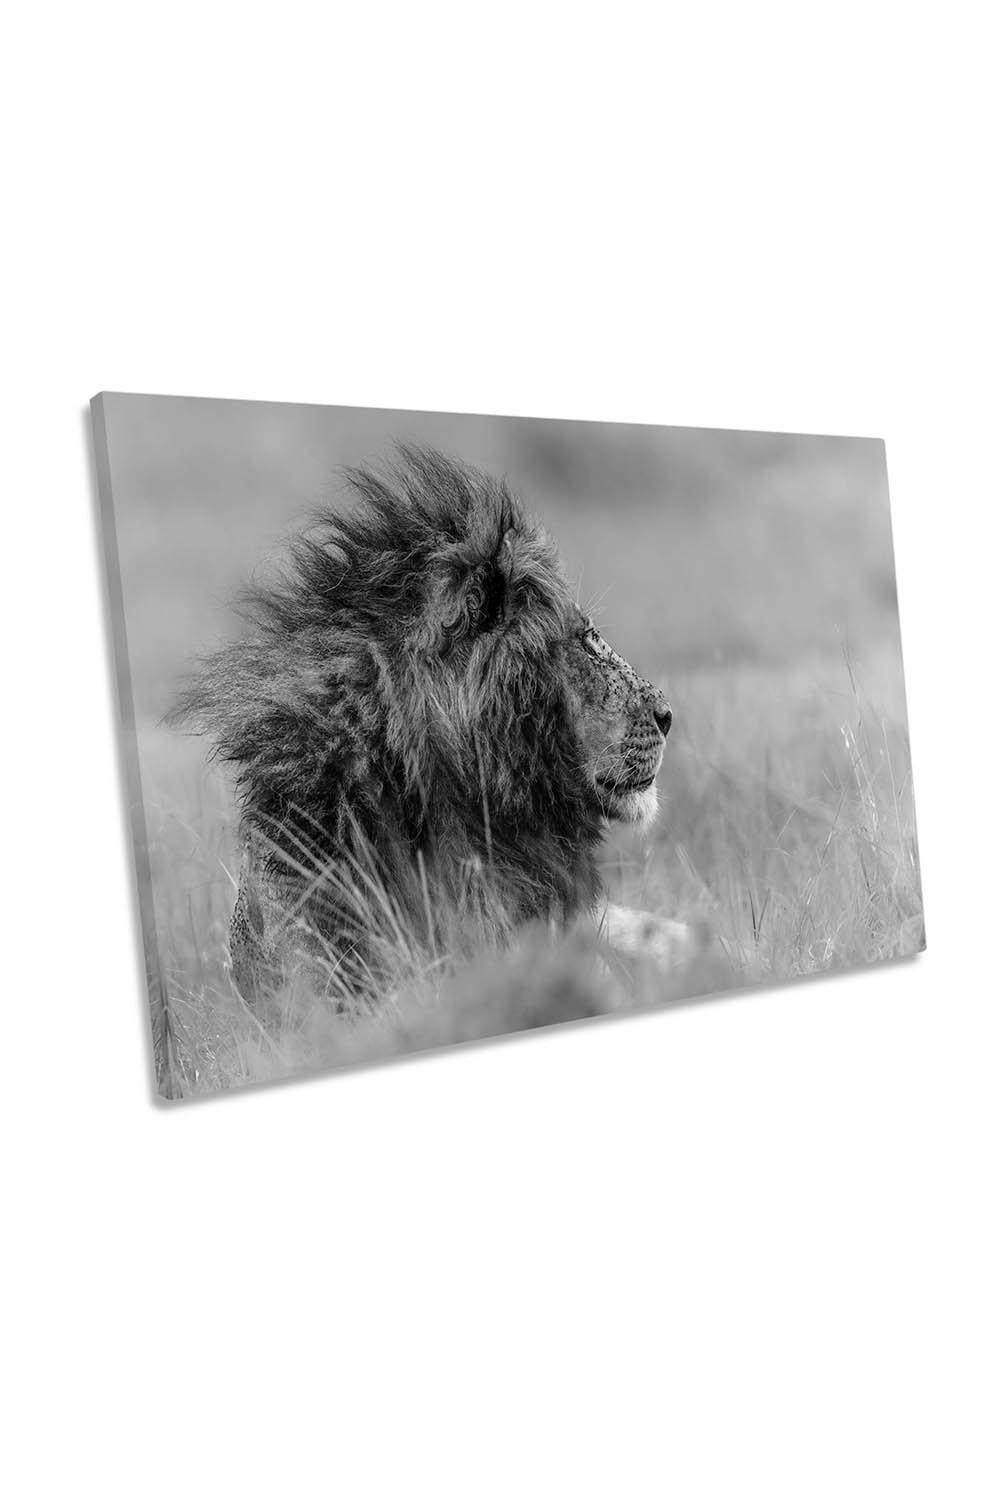 The King is Alone Lion Wildlife Canvas Wall Art Picture Print